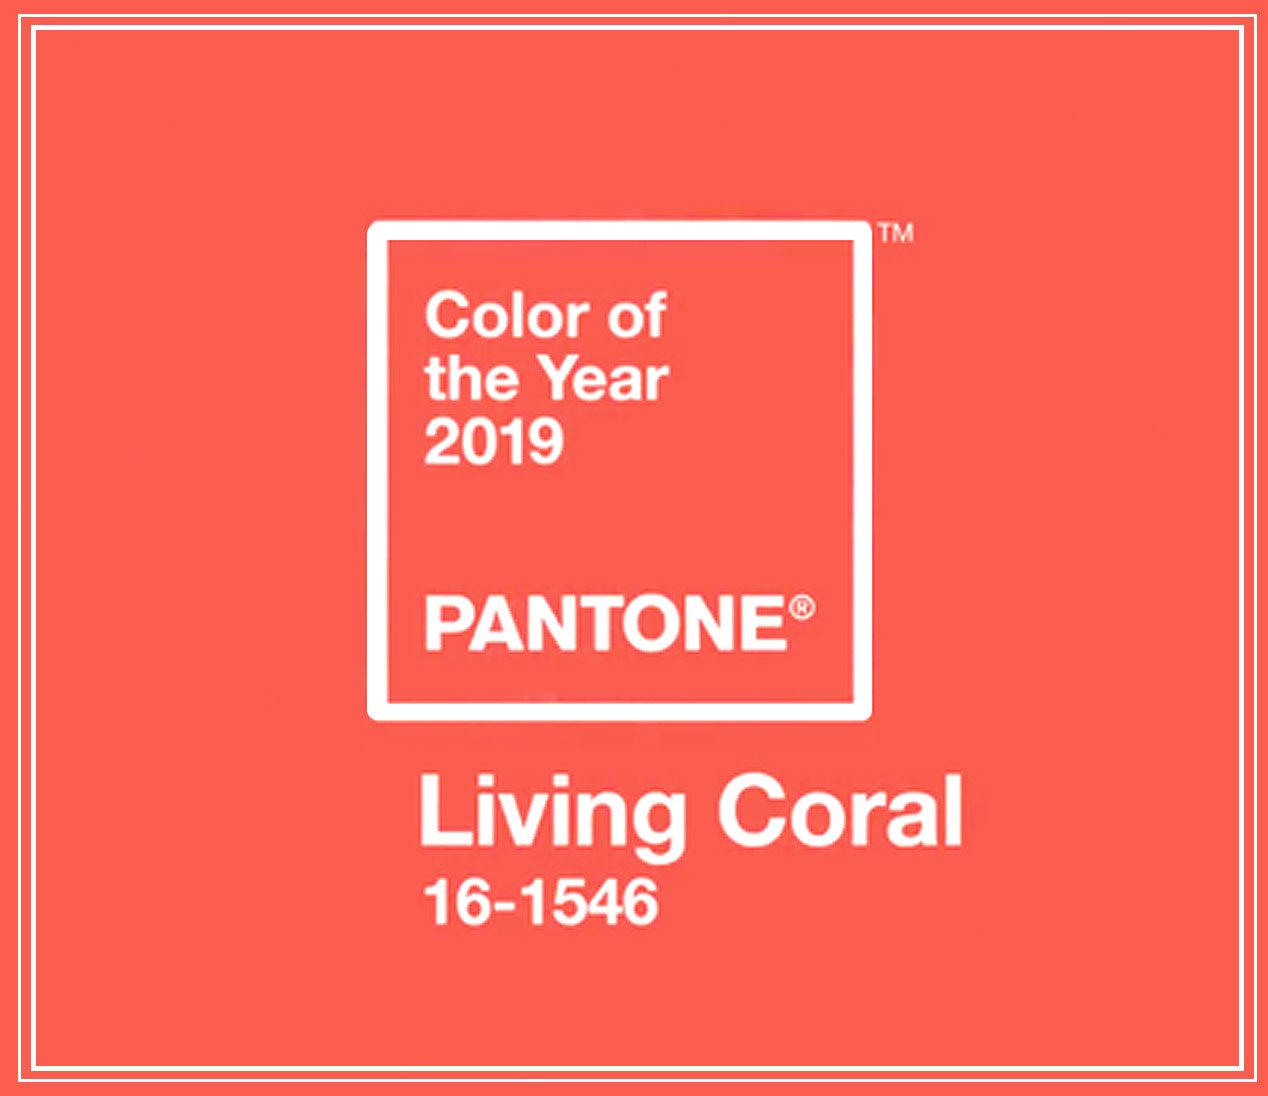 Color of the Year 2019 PANTONE 16-1546 Living Coral.